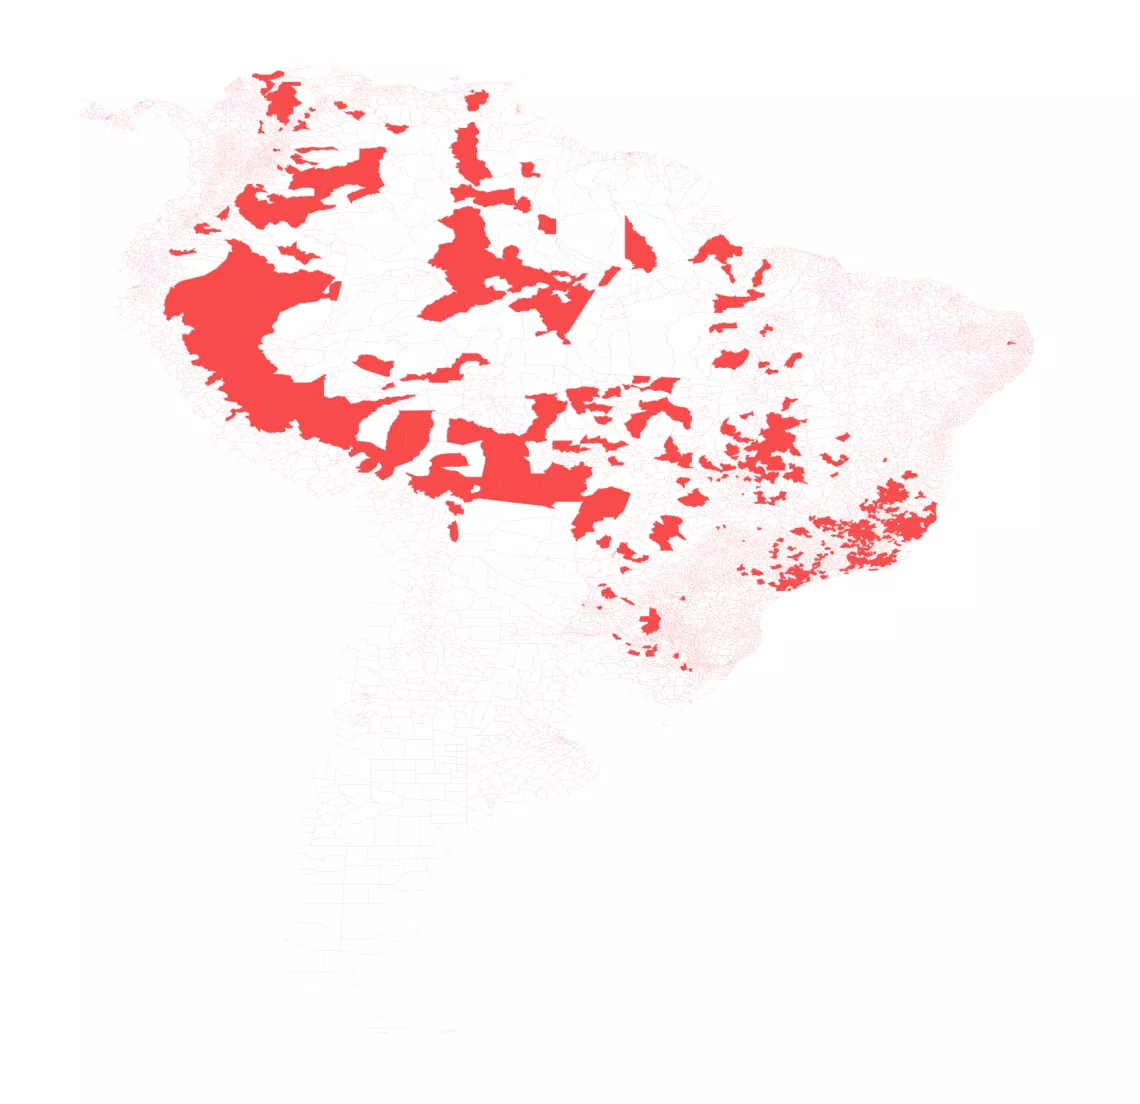 Reported cases of yellow fever in the Americas. Counties in red have recorded at least one case between 2000 and 2018.